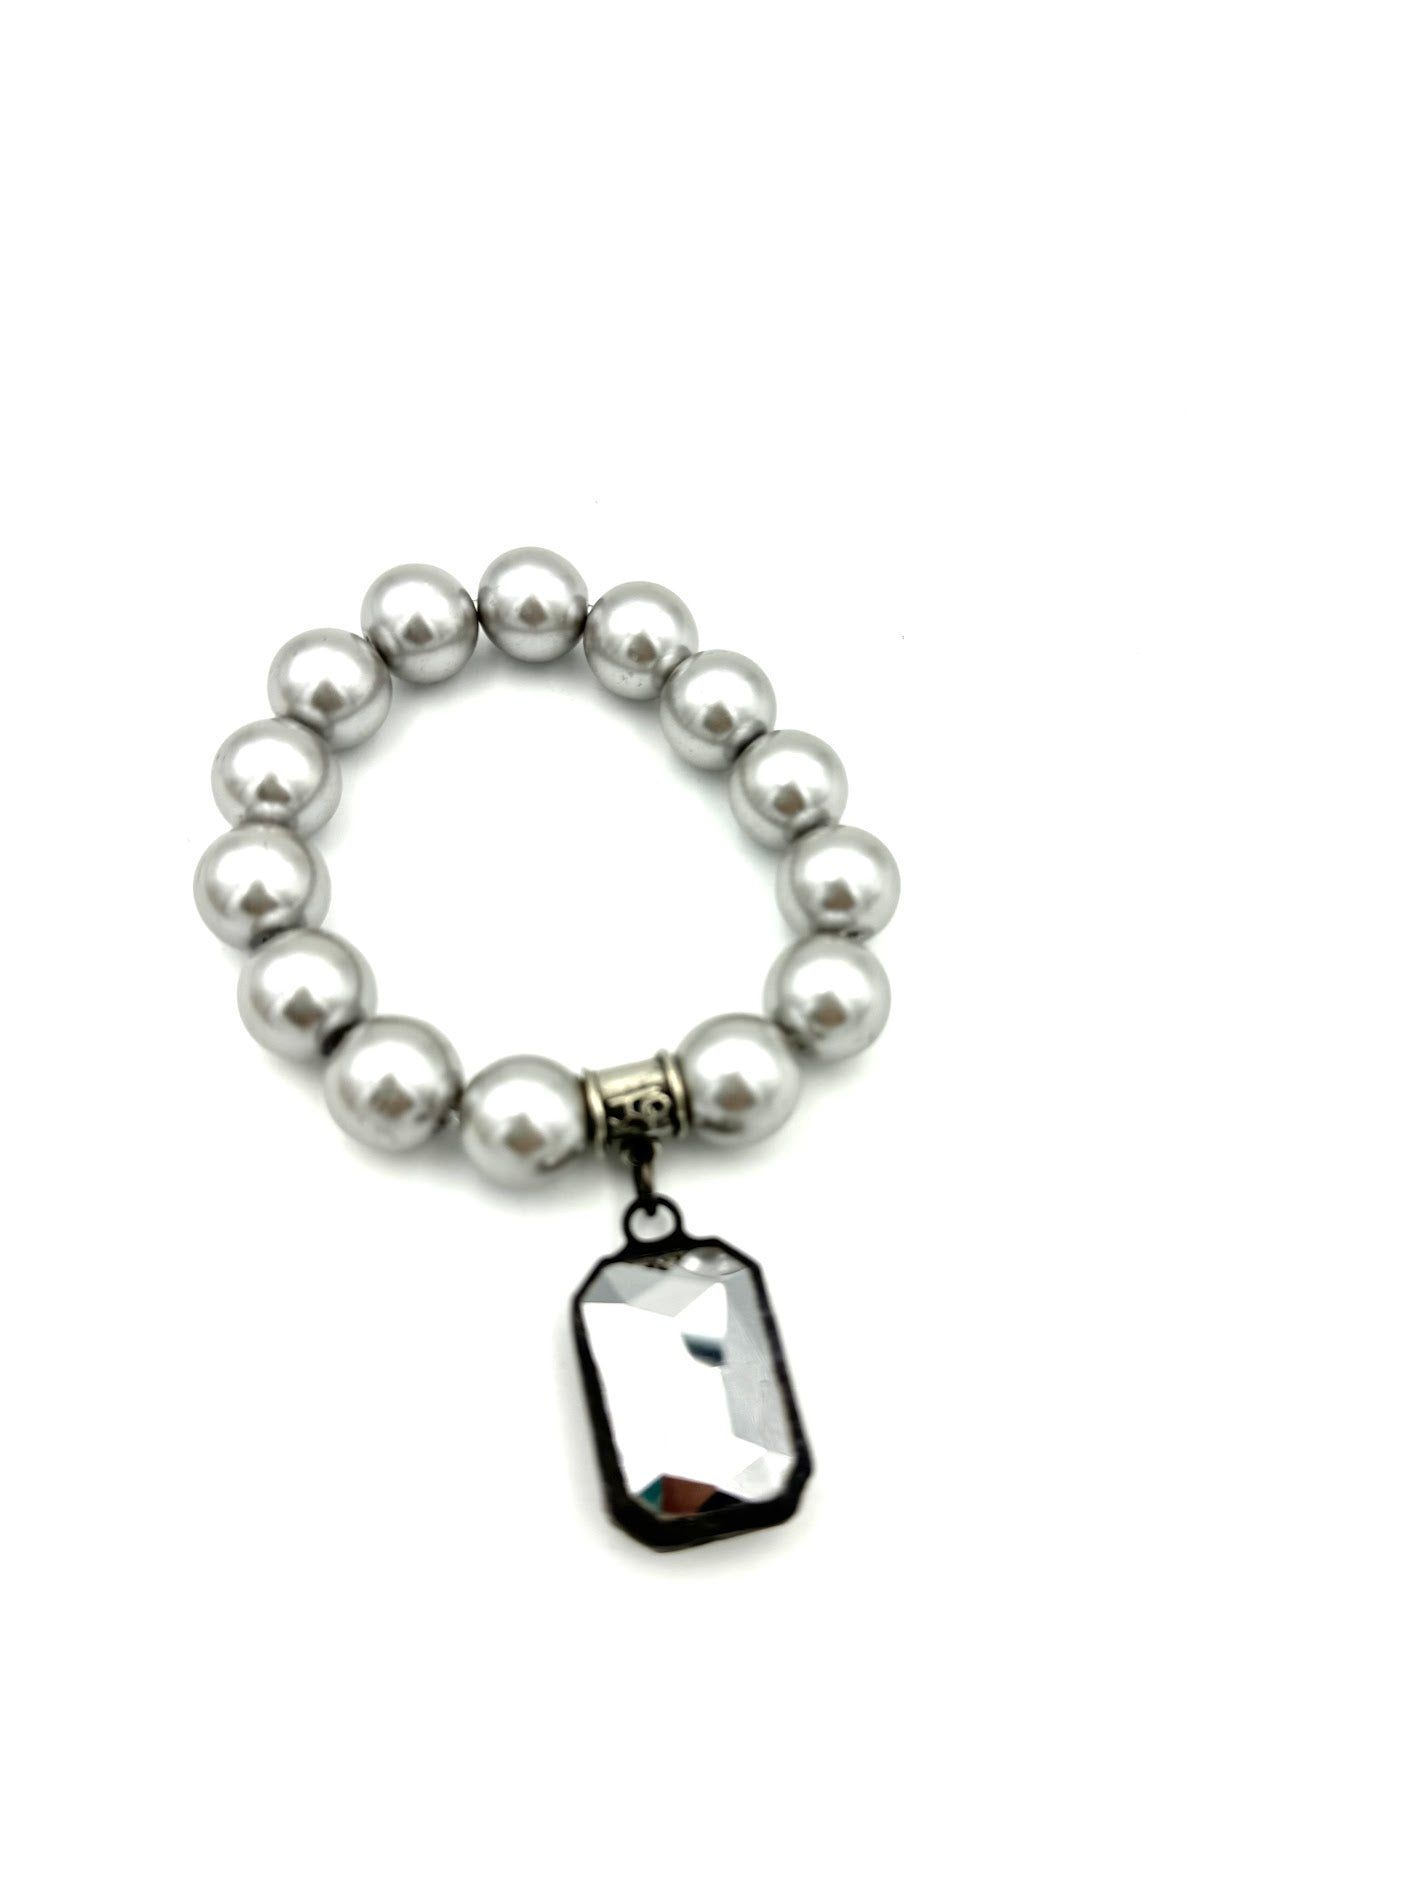 Pearl Bracelet with Crystal Focal